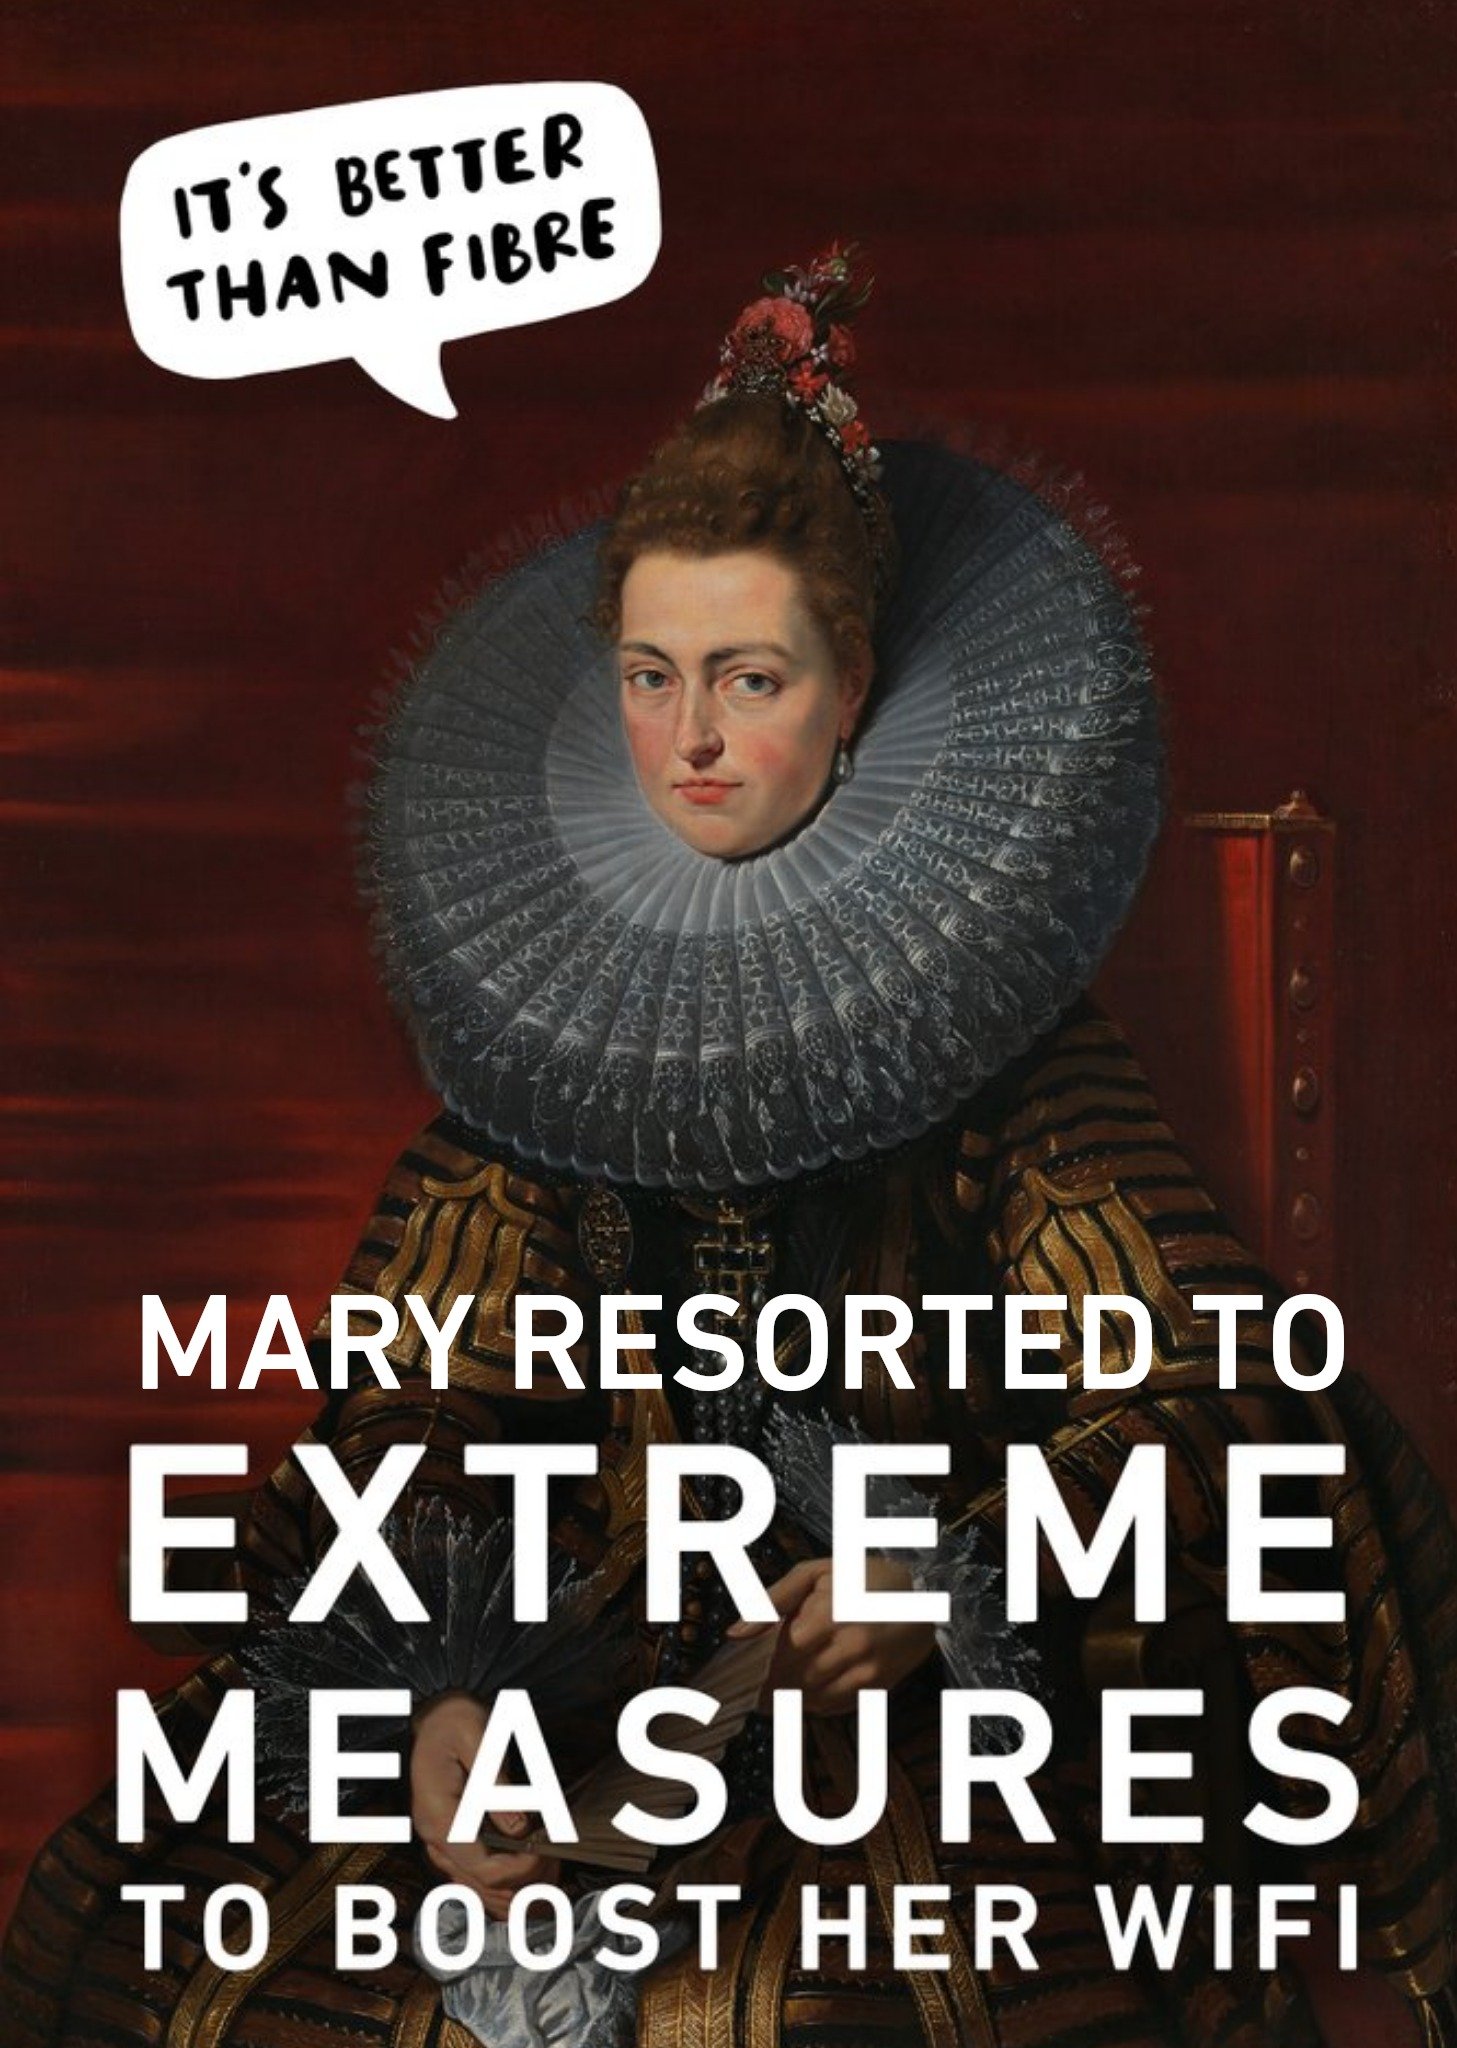 The National Gallery Funny Extreme Measures To Boost Wifi Birthday Card, Large